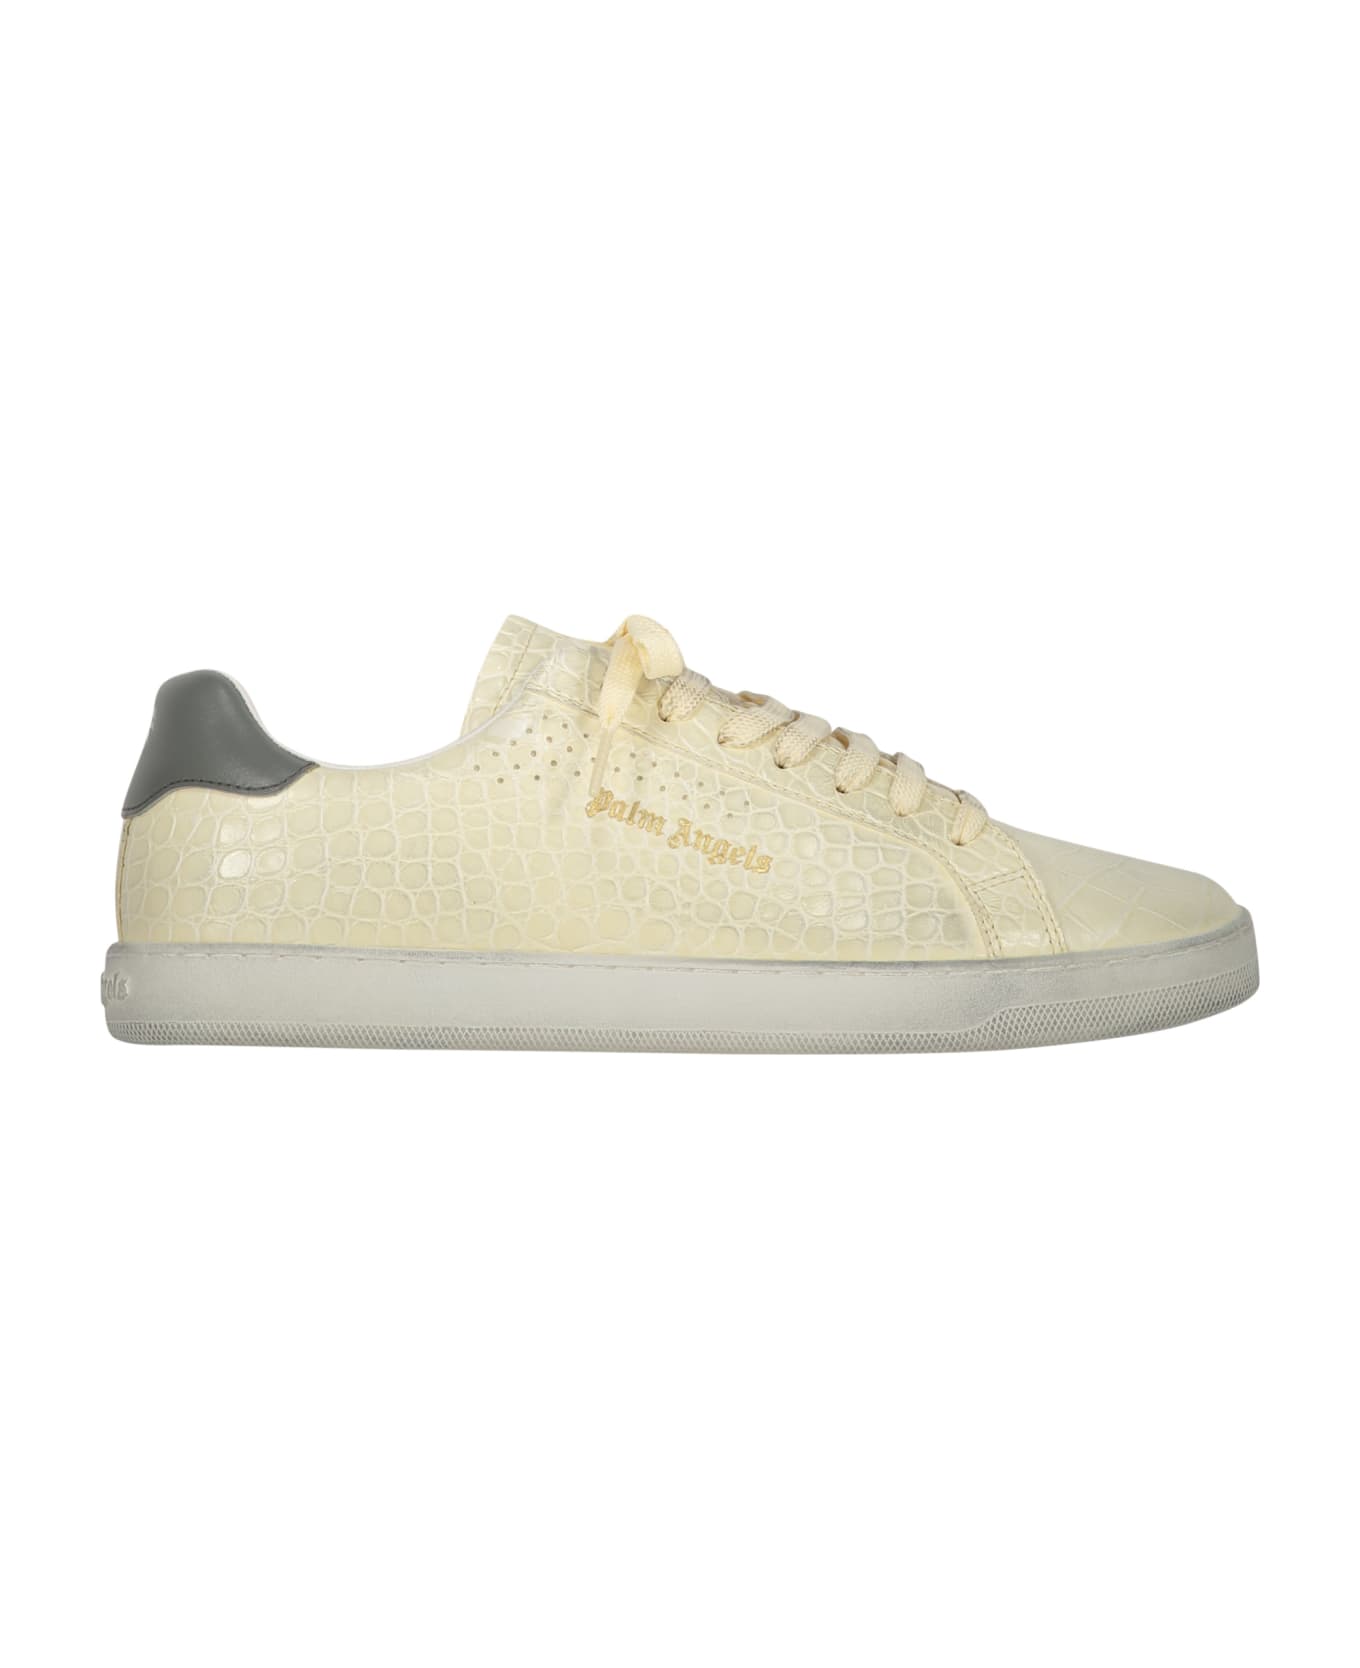 Palm Angels New Tennis Leather Sneakers - Ivory